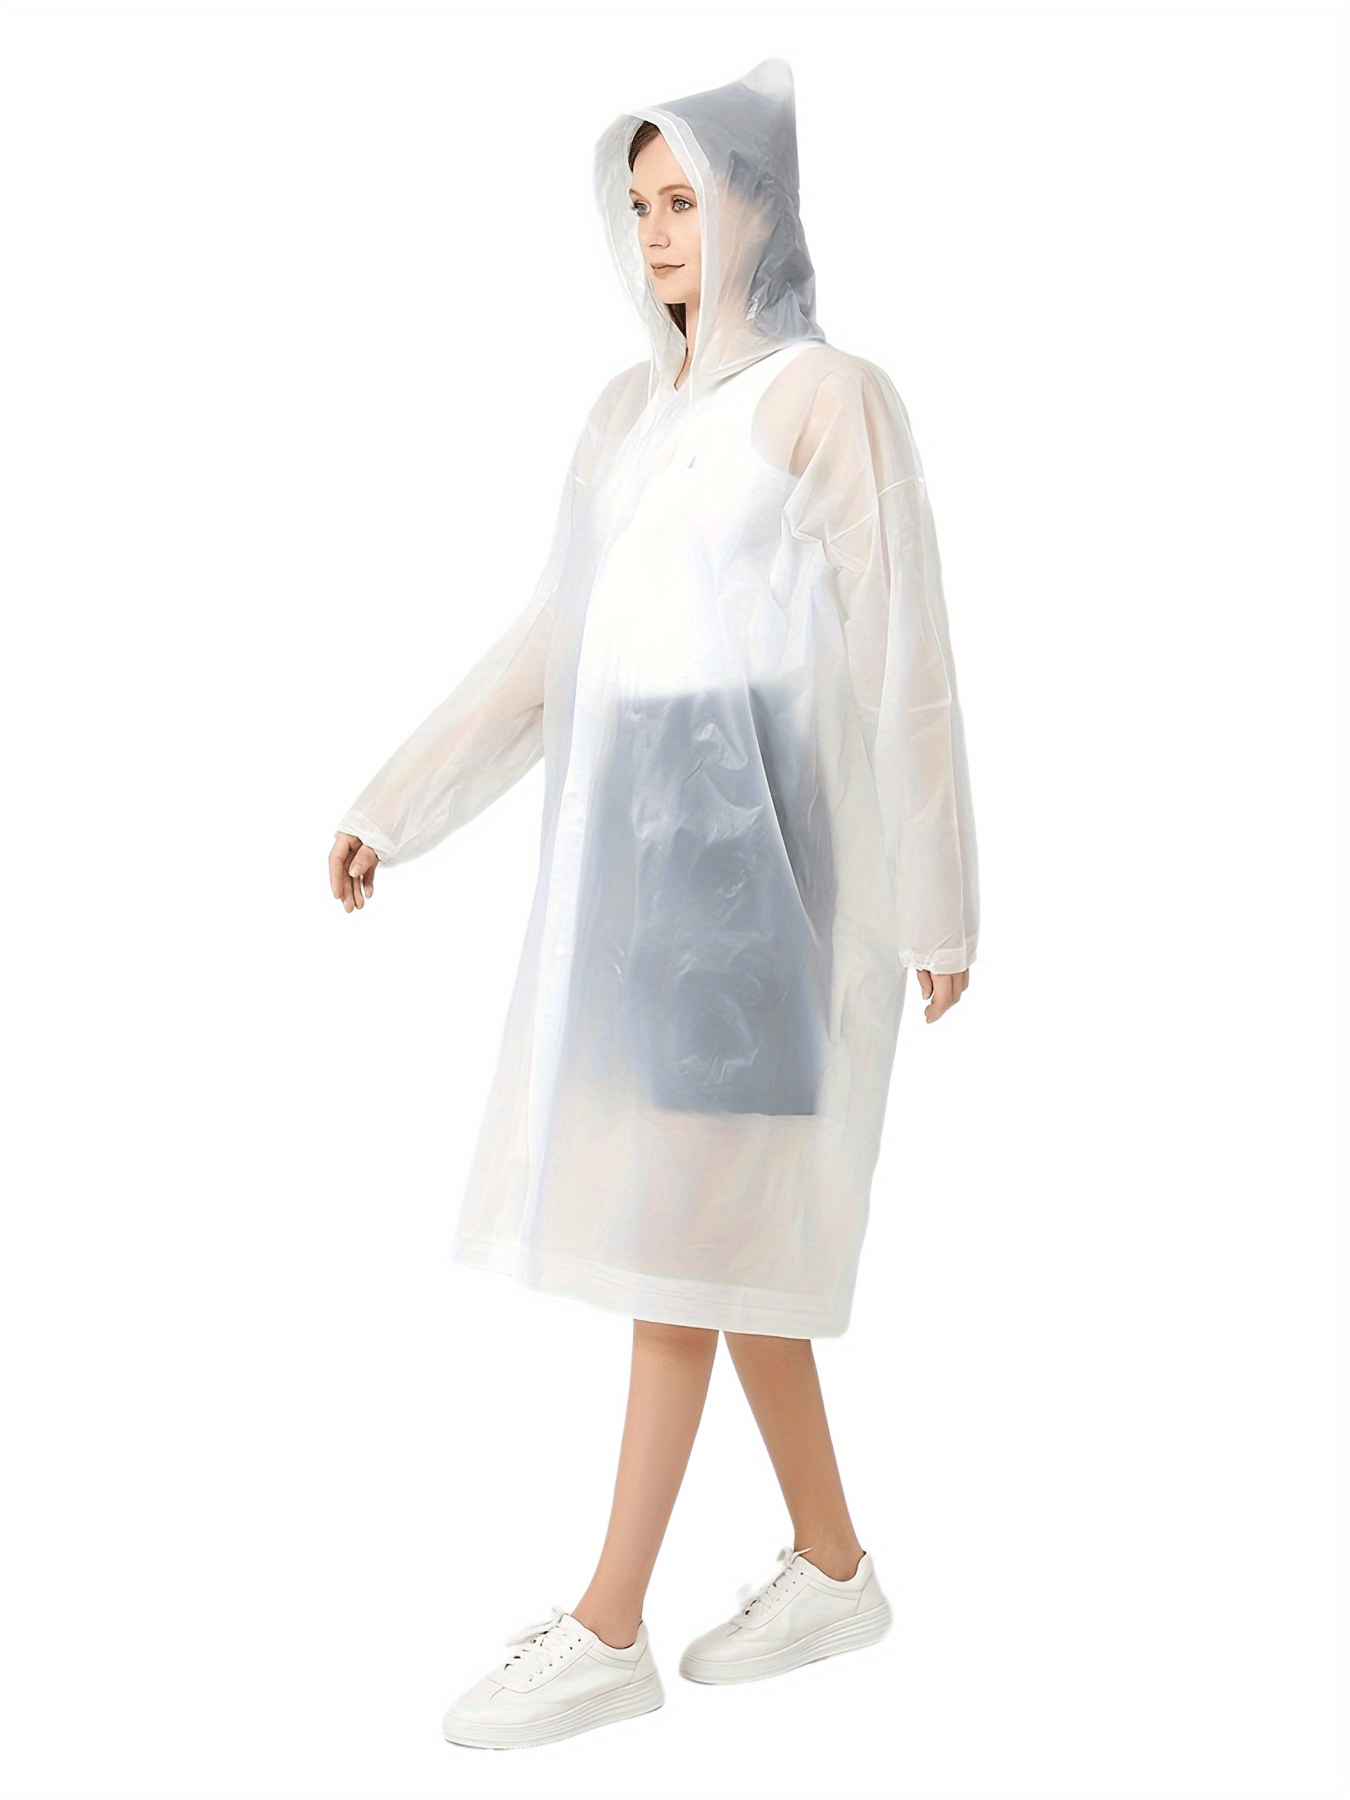 Raincoat women hooded, Clear Rain jacket, Poncho, Small. Mexican style